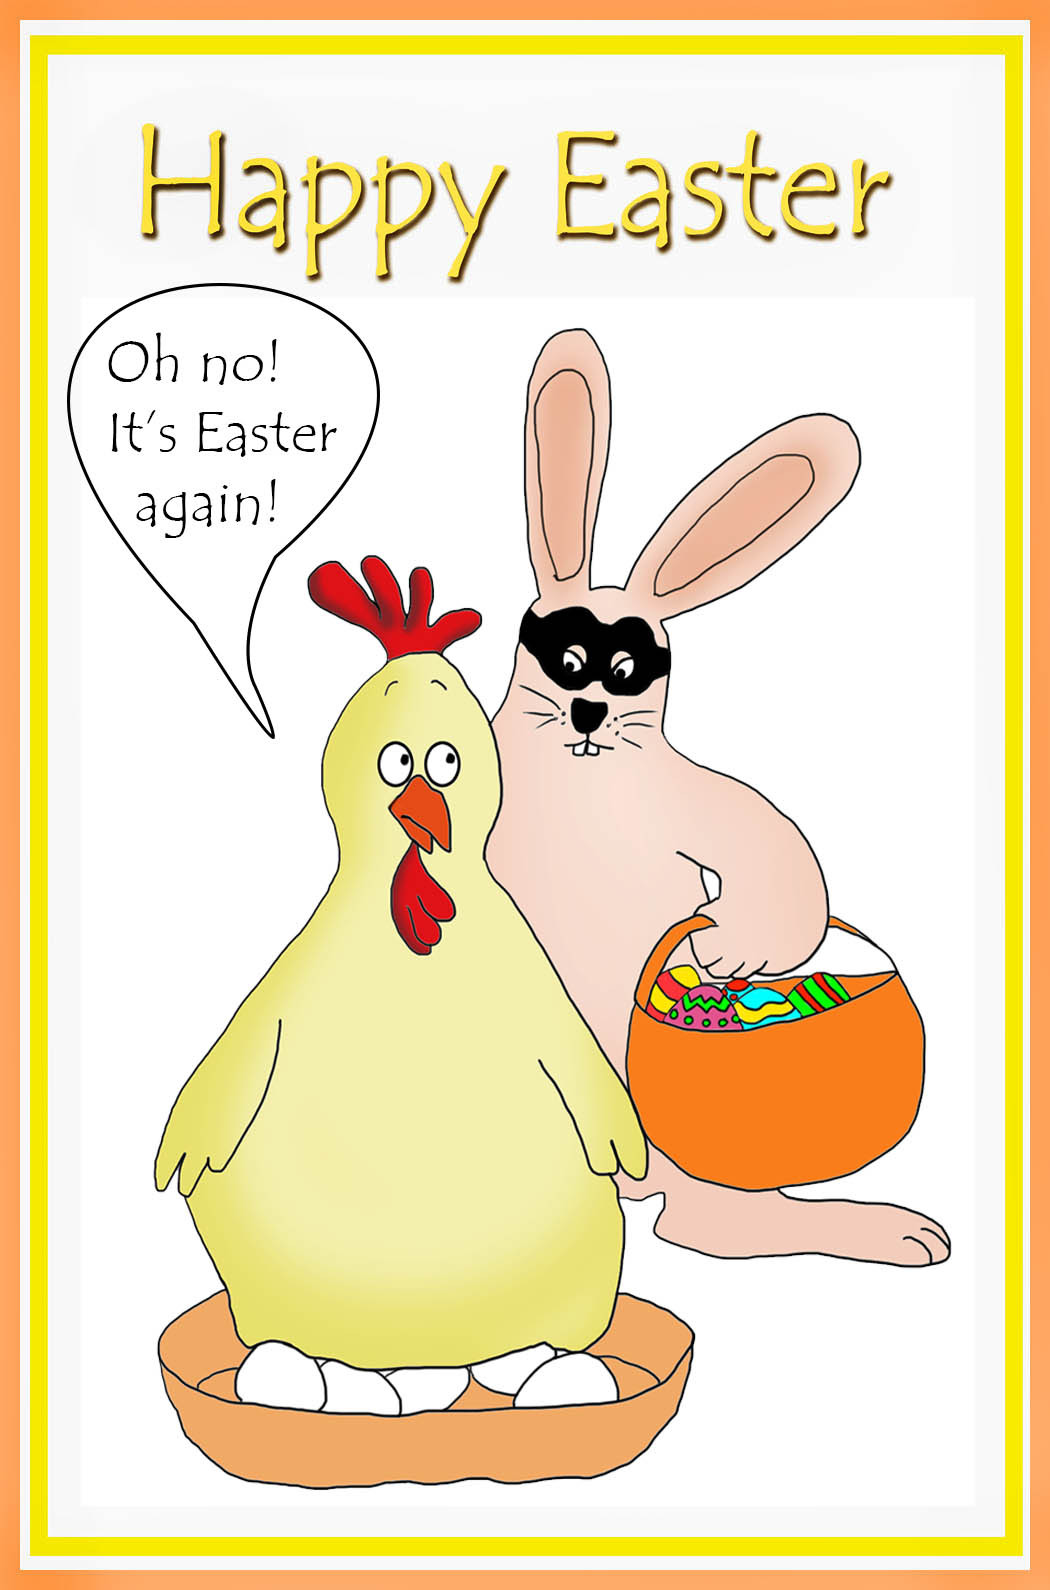 Funny Easter Quotes
 16 Free Funny Easter Greeting Cards